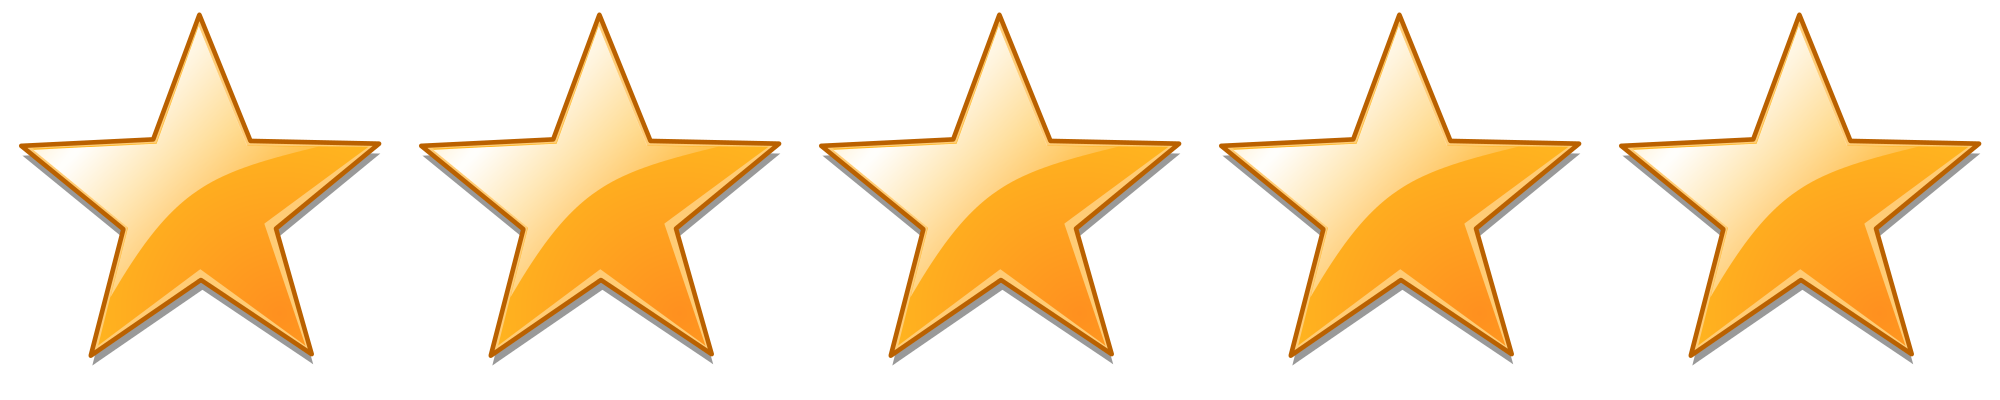 5-star-rating-clipart-18